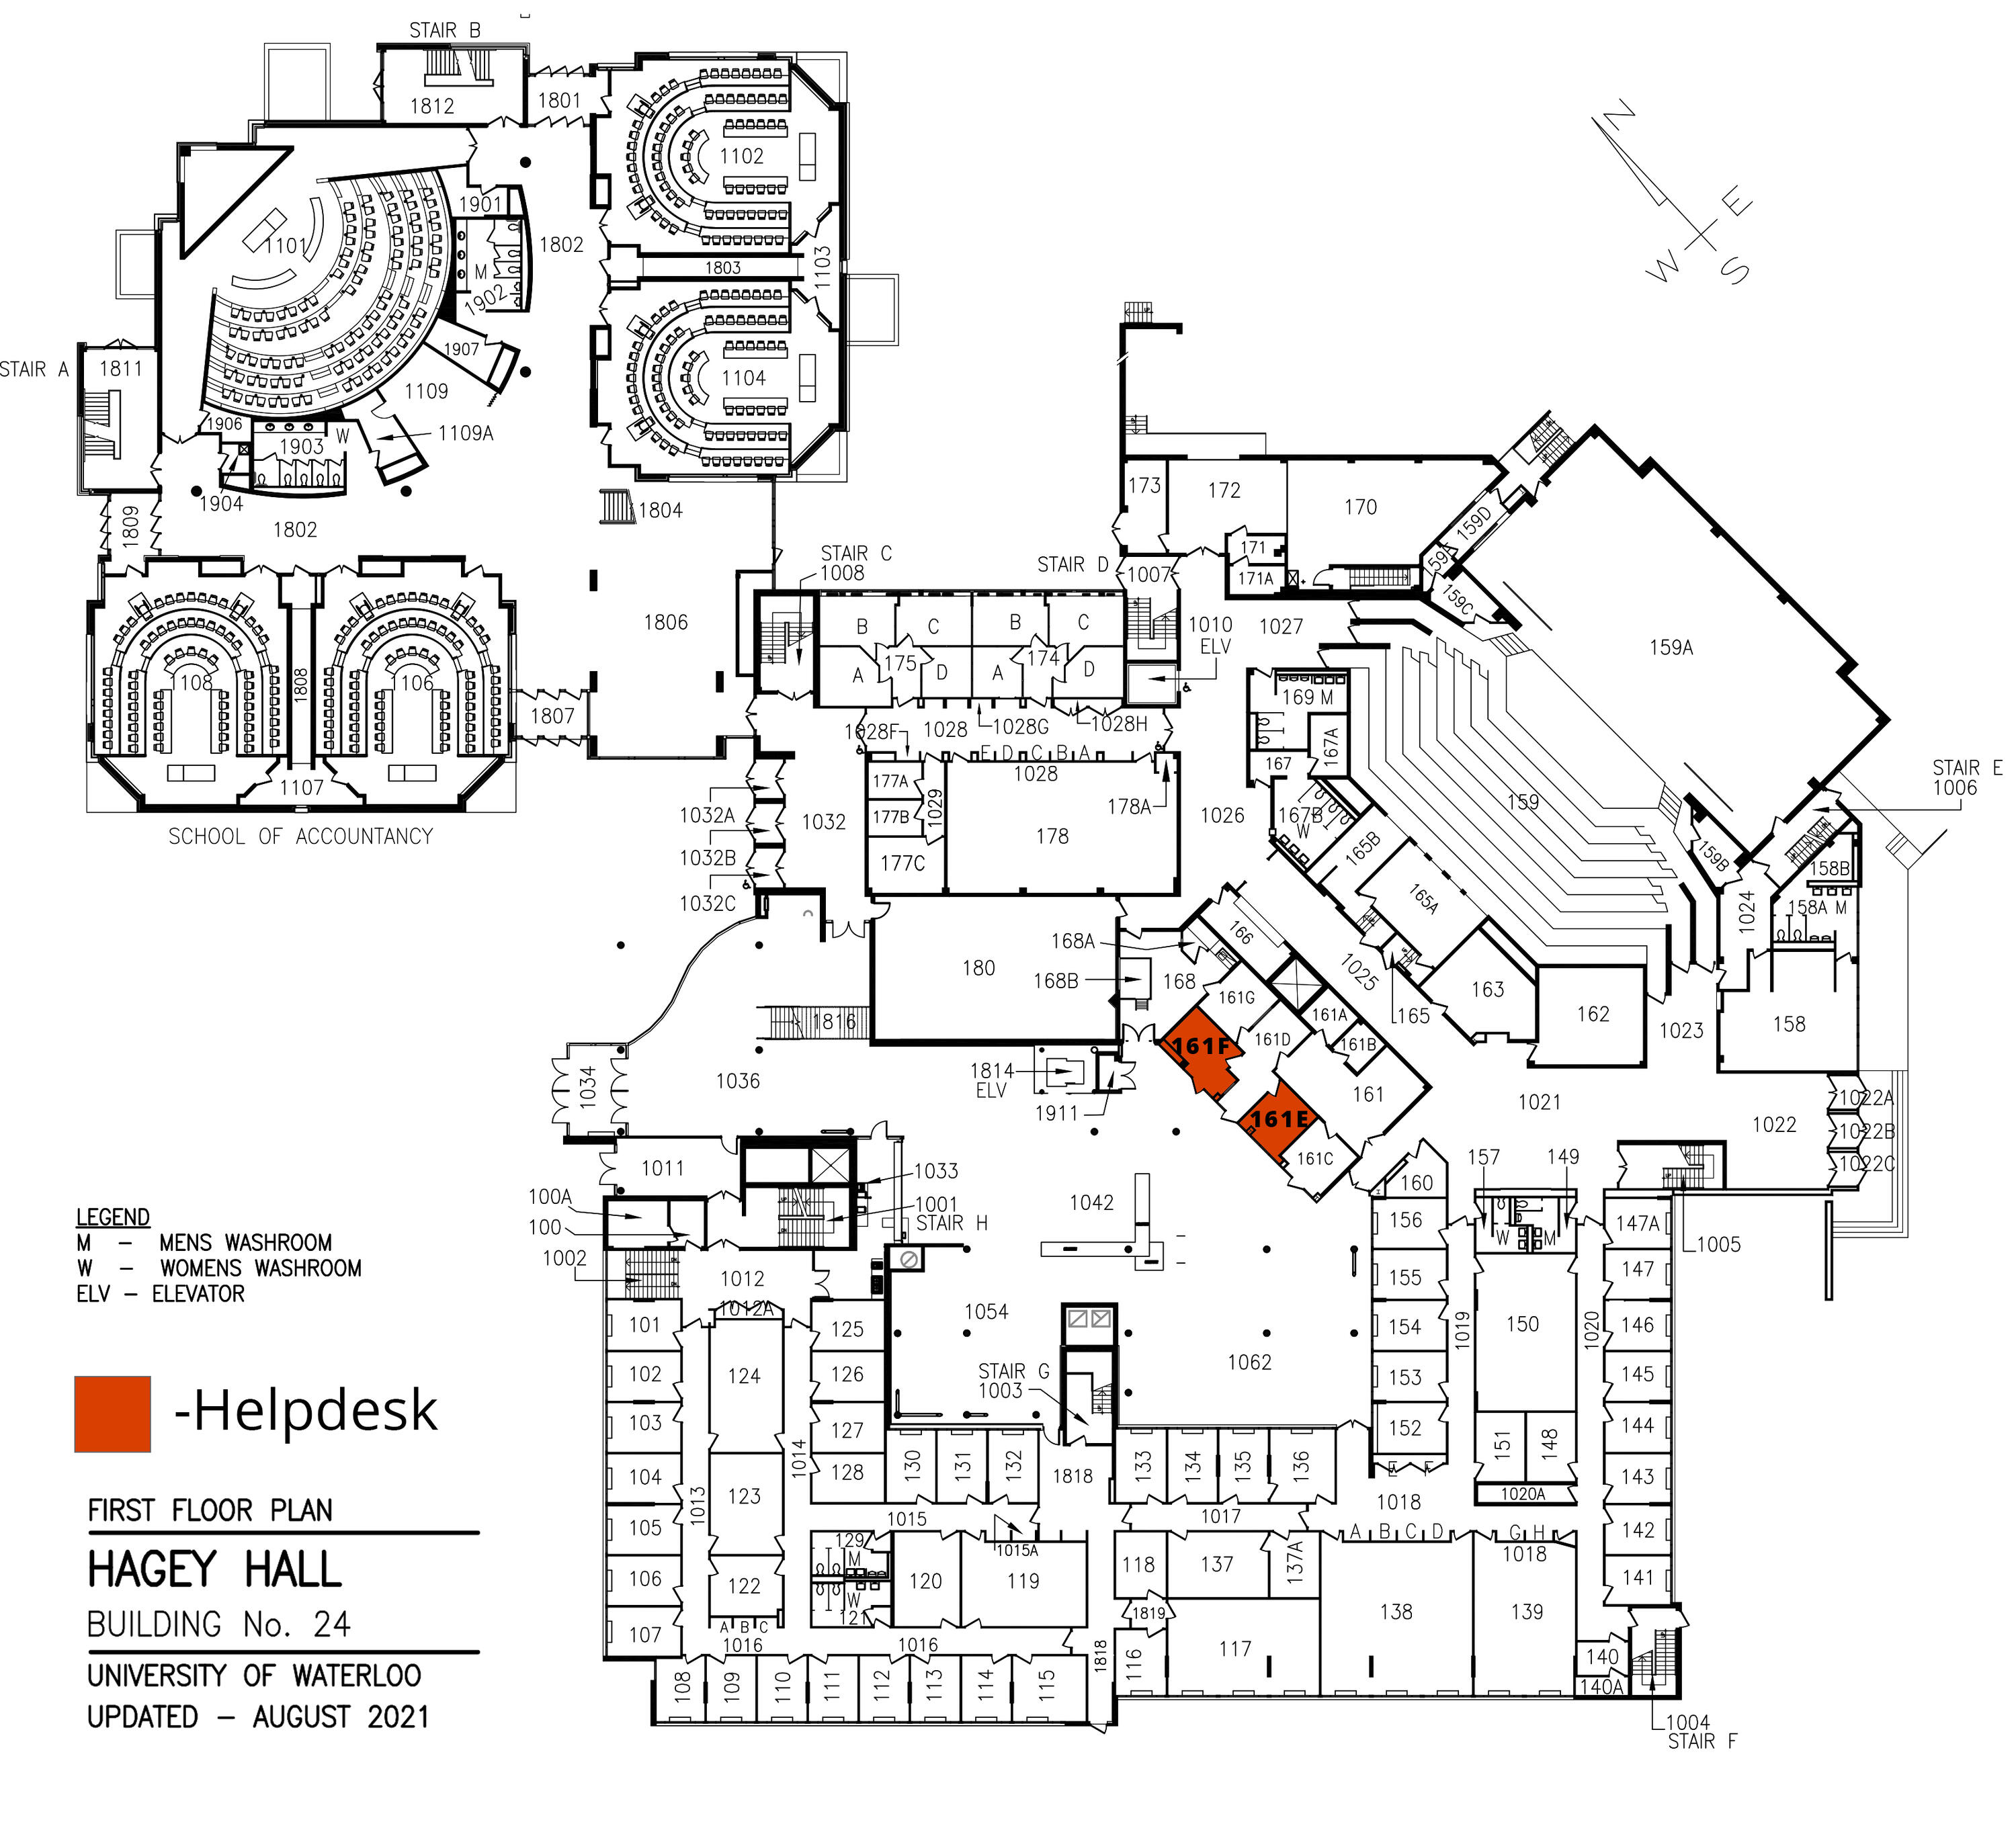 A map of the arts computing office's facilities in Hagey Hall. There is a helpdesk in rooms HH-161 E and F.